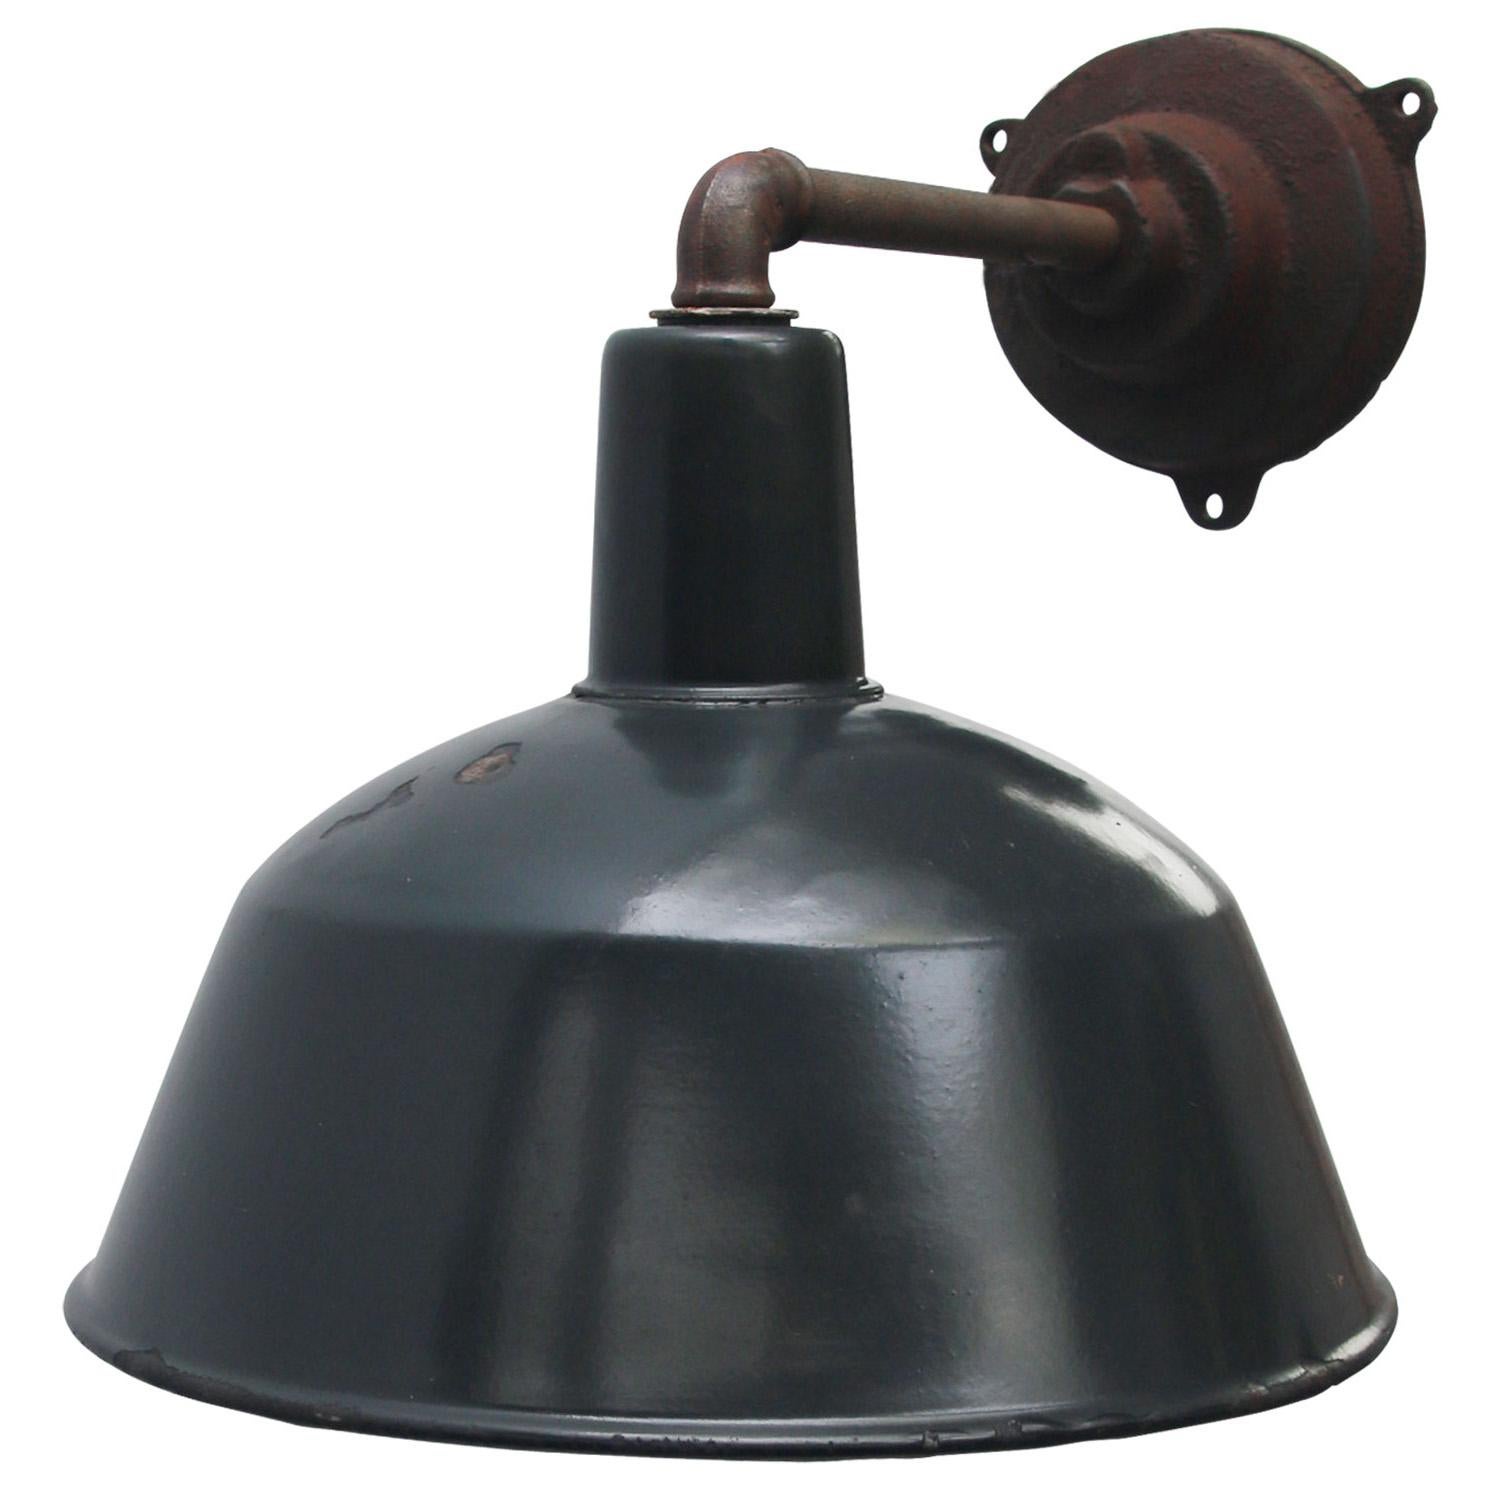 Factory wall light. Blue enamel. White interior.

Diameter cast iron wall piece: 12 cm, three holes to secure. 

Weight: 3.10 kg / 6.8 lb

Priced per individual item. All lamps have been made suitable by international standards for